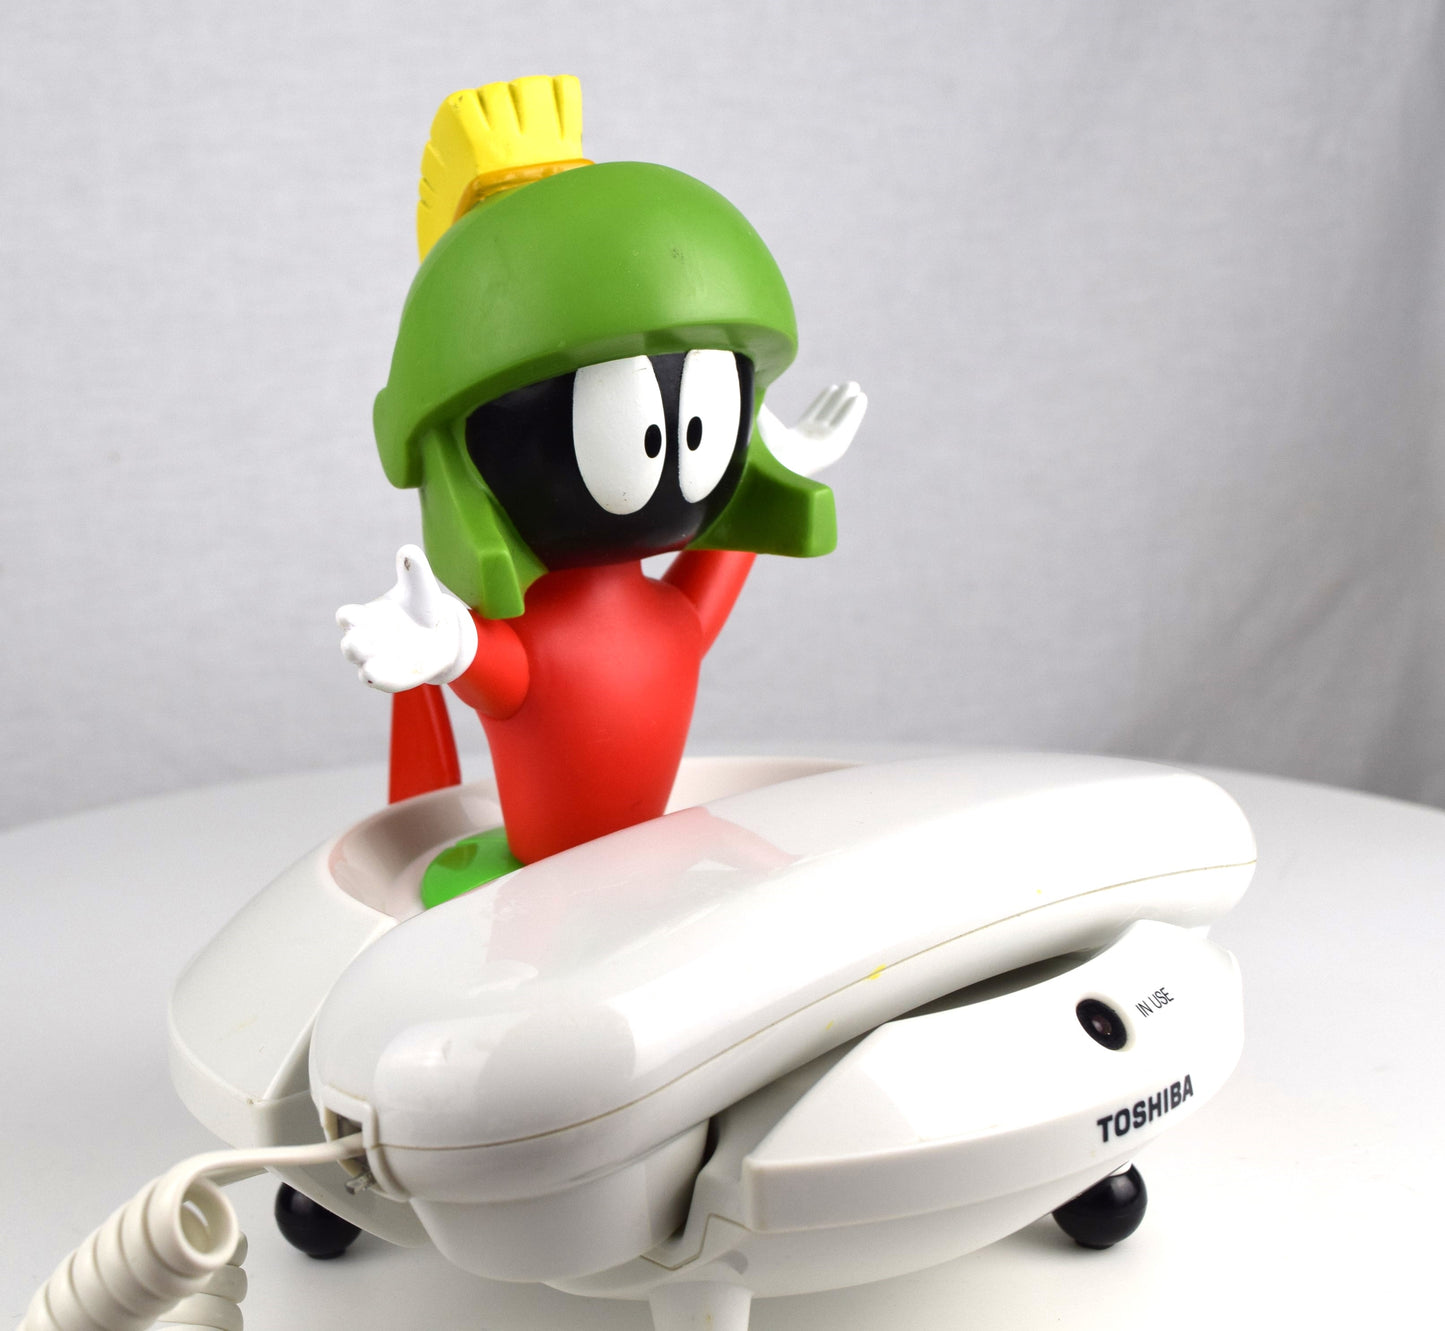 Marvin the Martian Phone